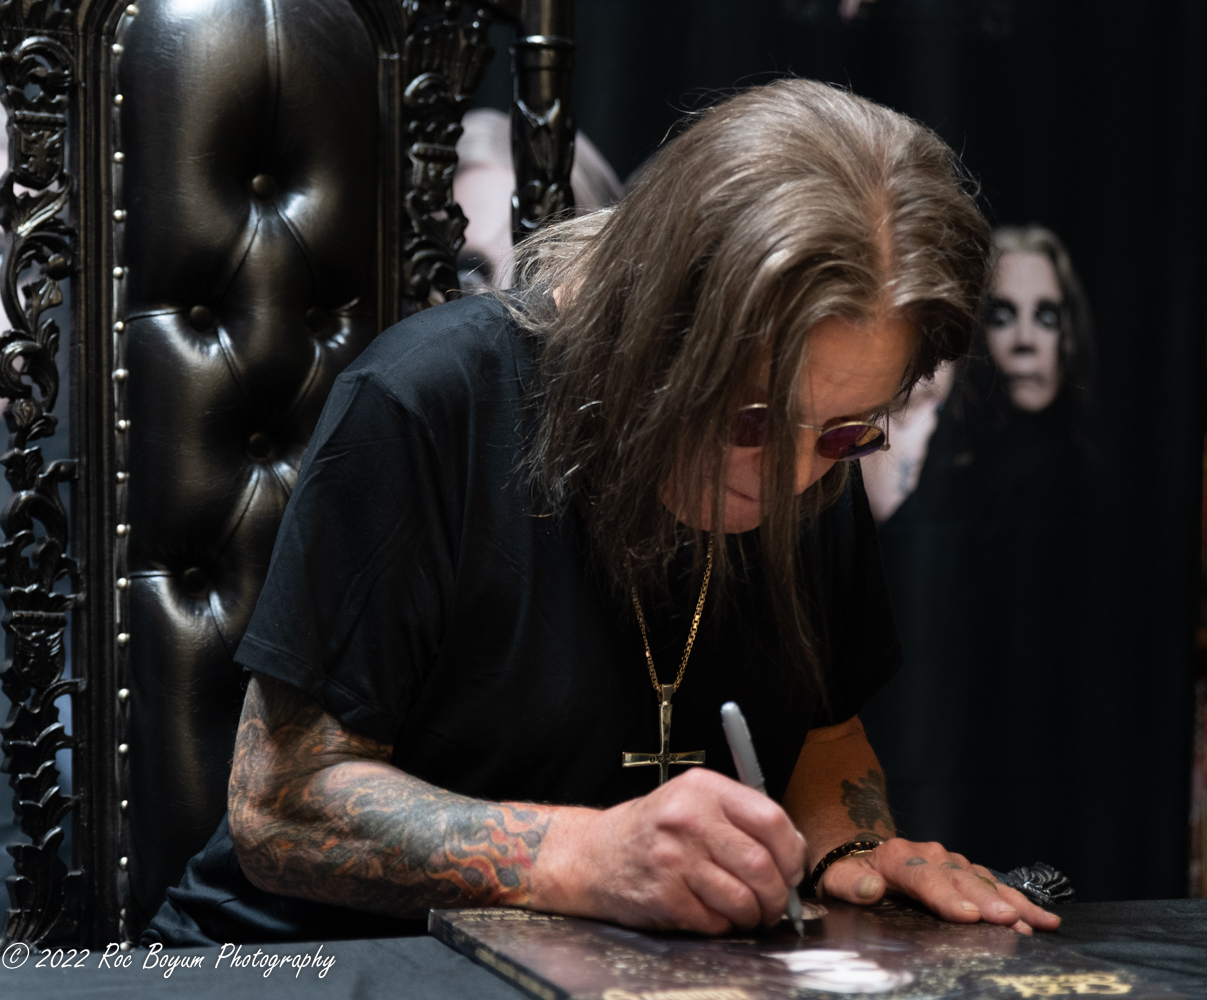 Ozzy Osbourne Patient Number Record Signing Long Beach CA